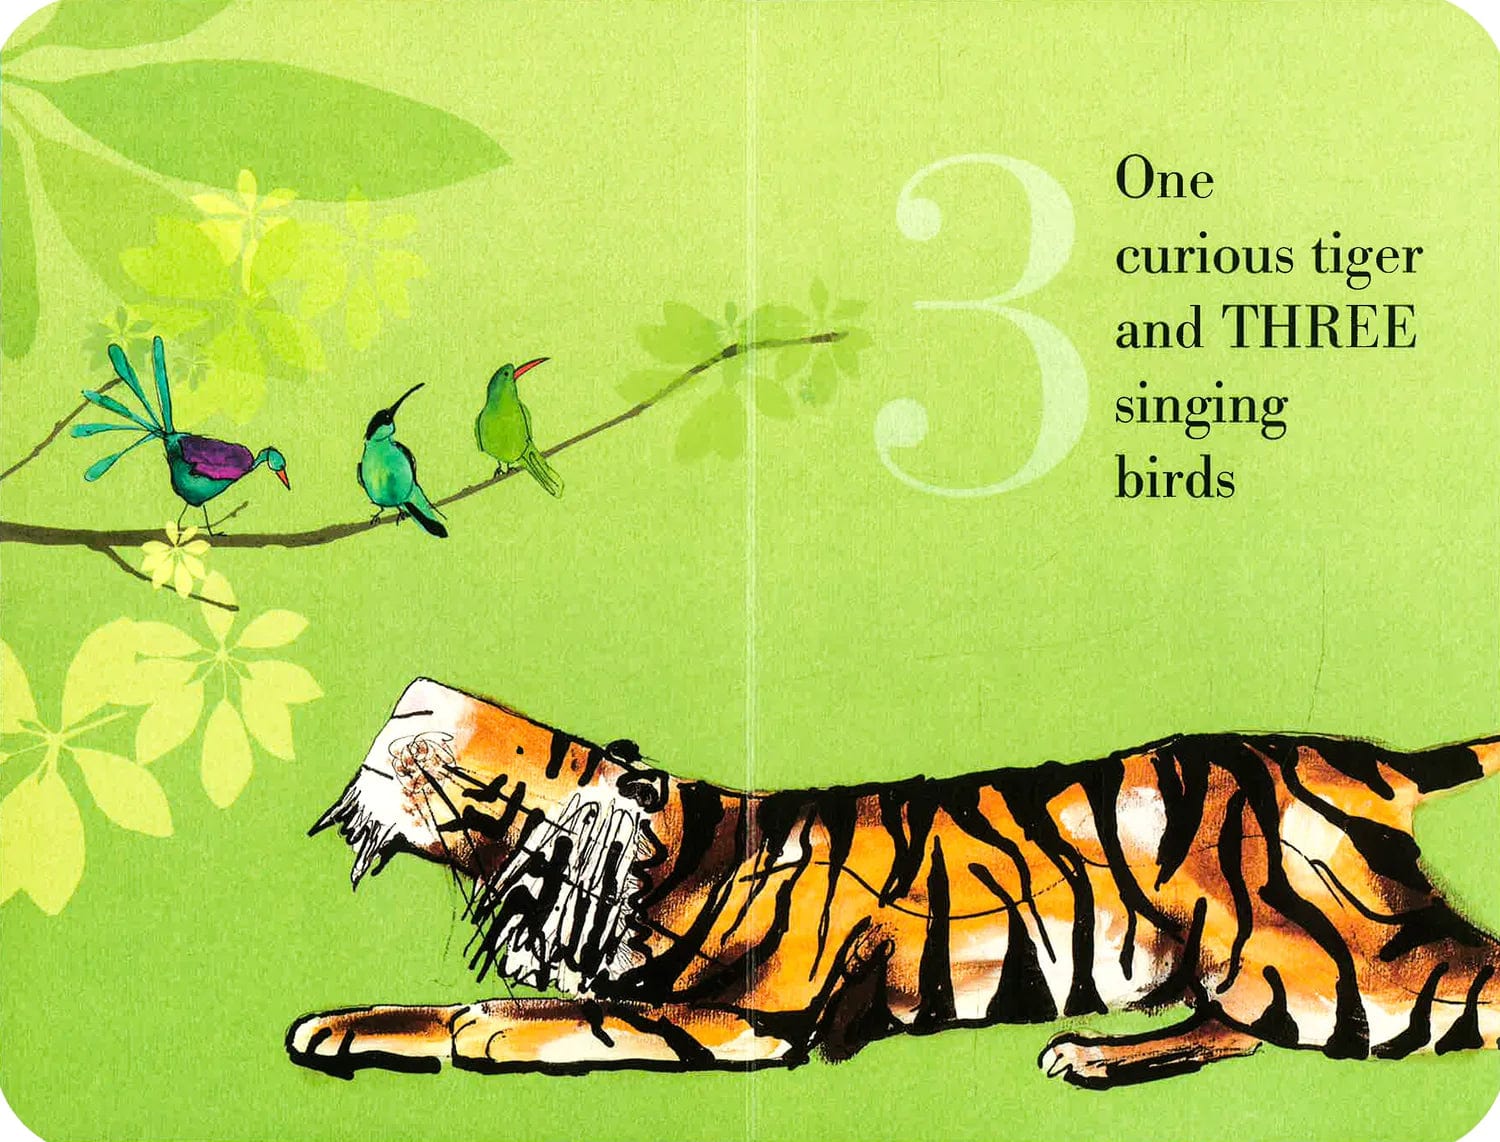 little tiger One Happy Tiger Author: Catherine Rayner ( Board Books)